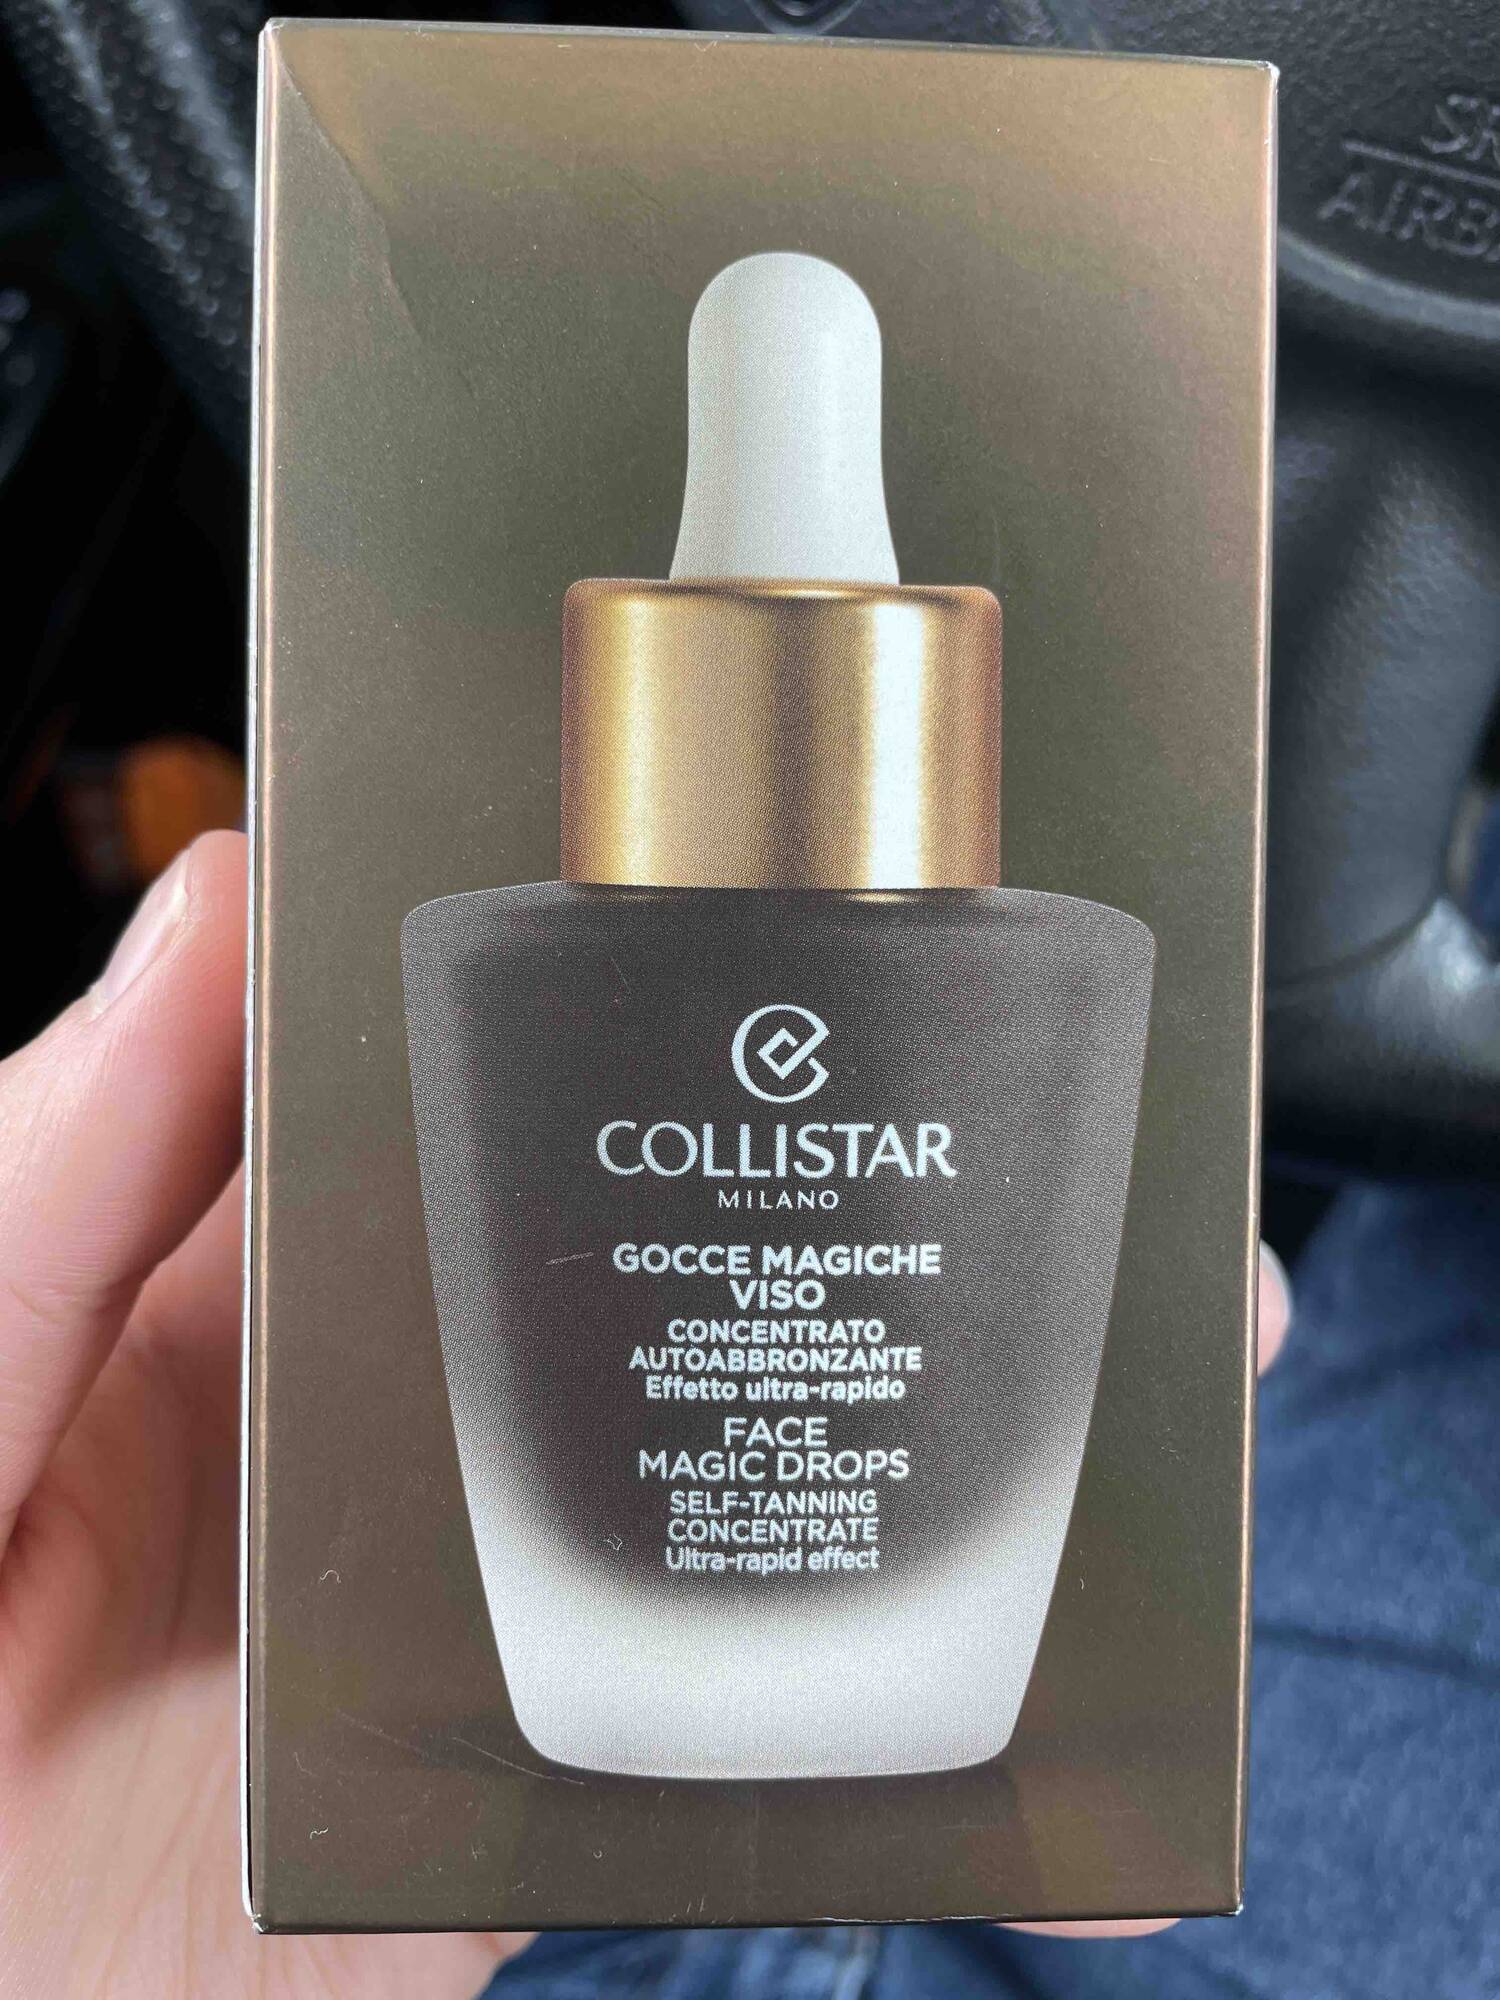 COLLISTAR - Face magic drops - Self-tanning concentrate